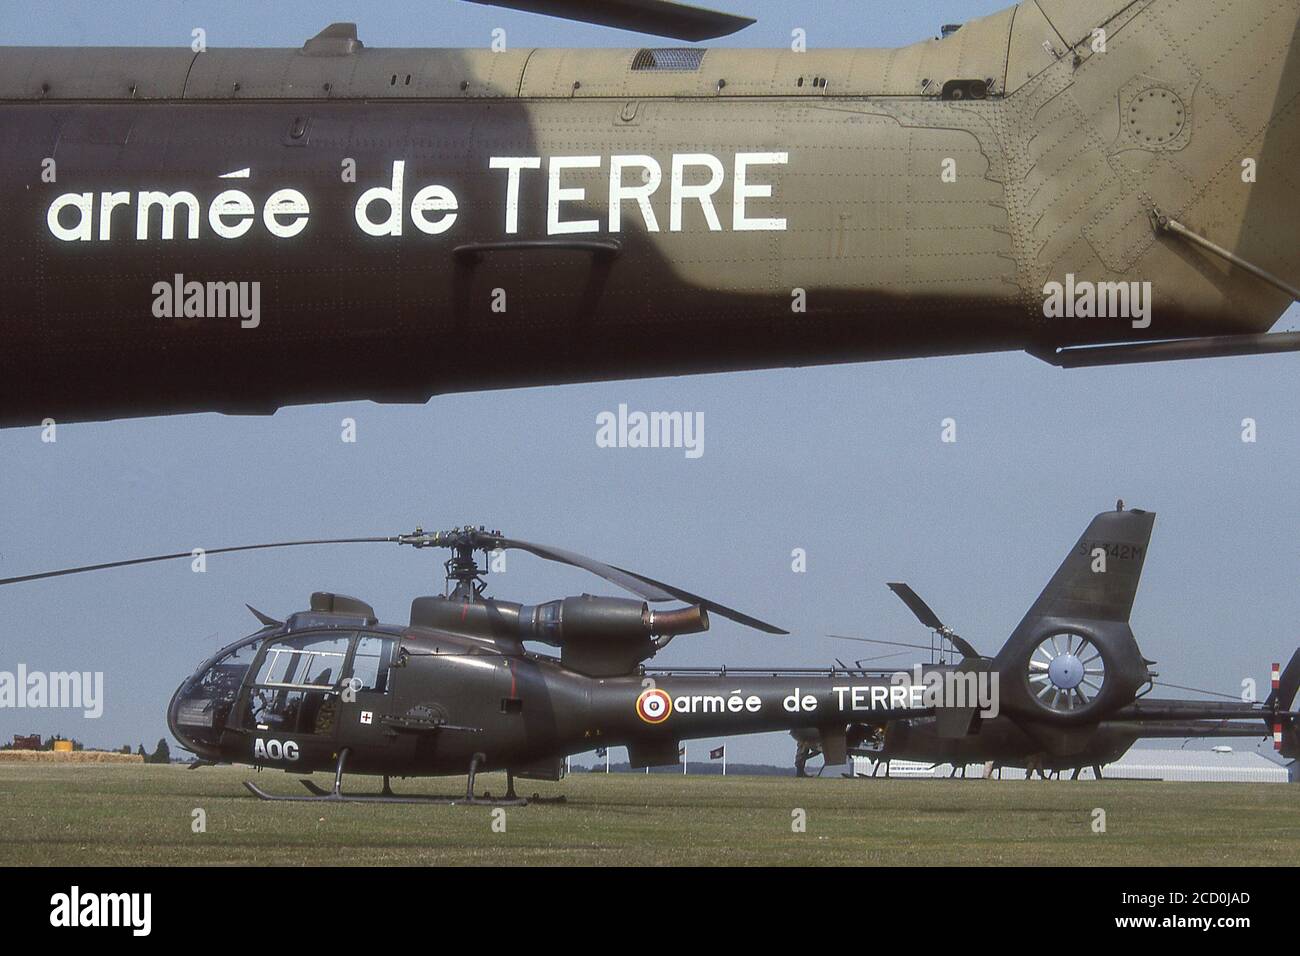 ARMEE DE TERRE (FRENCH ARMY) GAZELLE HELICOPTER. Stock Photo